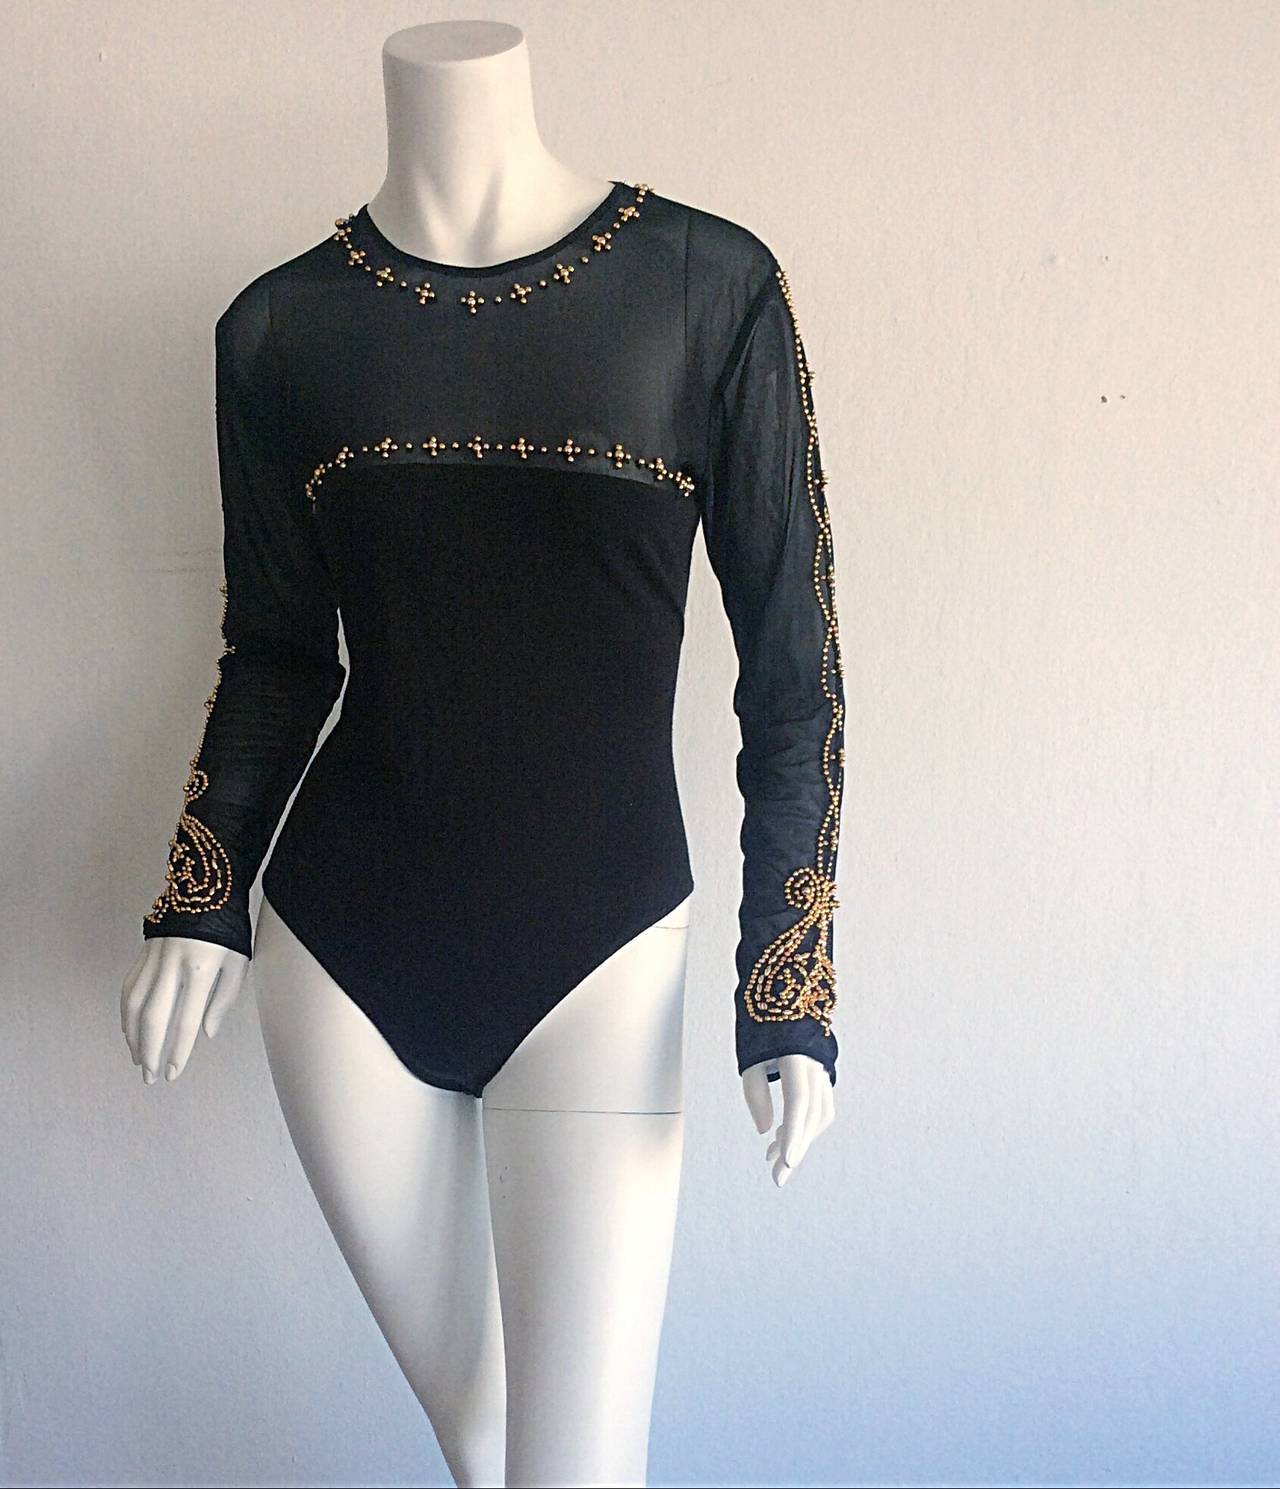 Sexy vintage Bob Mackie black cotton body suit, with a mesh bust and sleeves. Gorgeous gold beading throughout. Can easily be dressed up or down. Lovely with a ball skirt, yet perfect with jeans. In great condition. Approximately Size Small-Medium